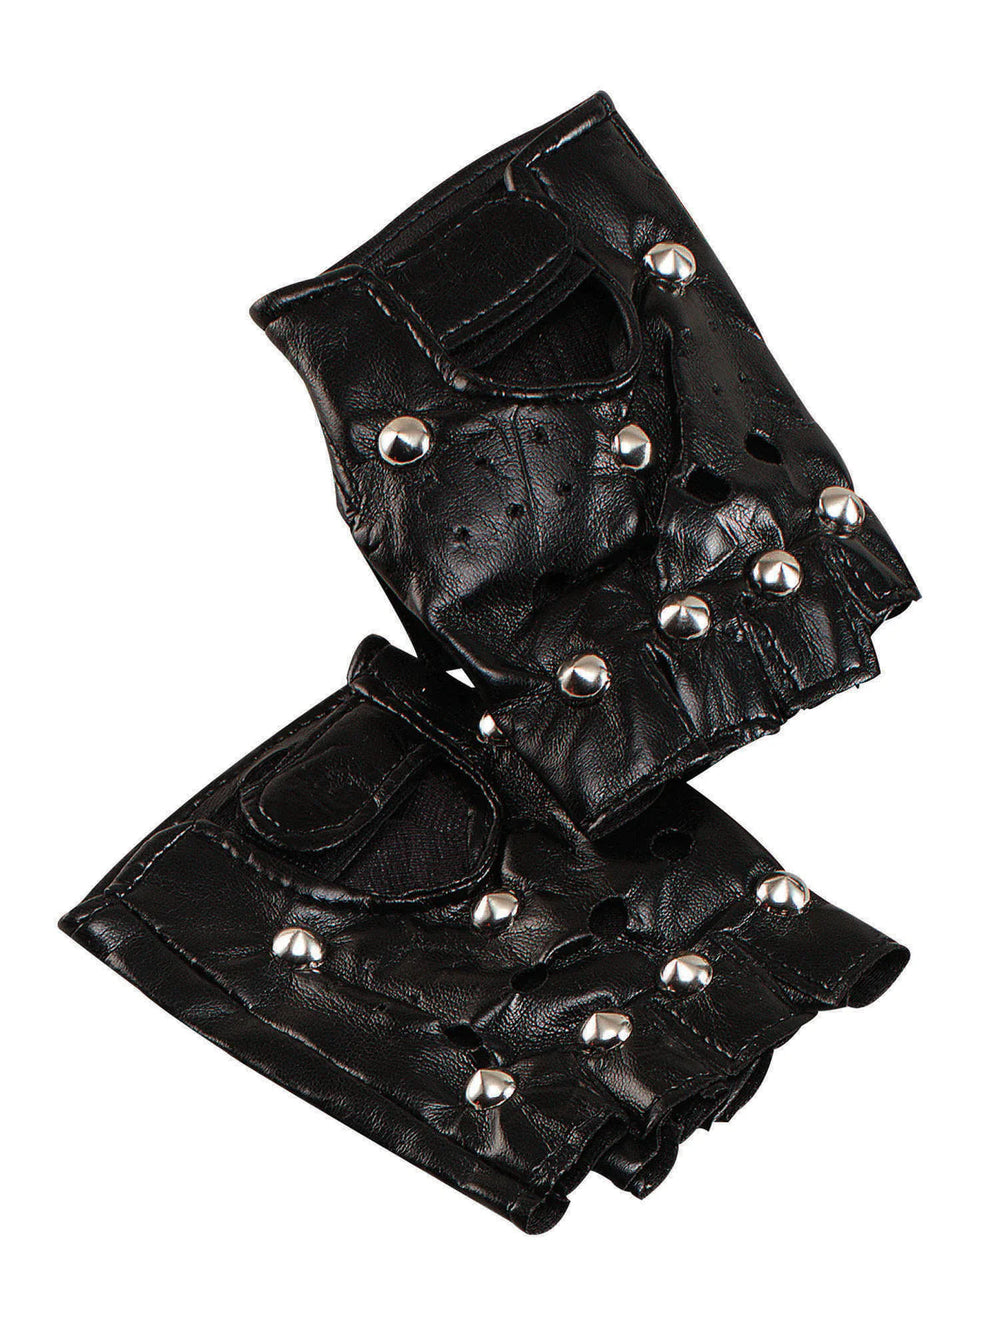 Studded Punk Gloves Costume Accessory_2